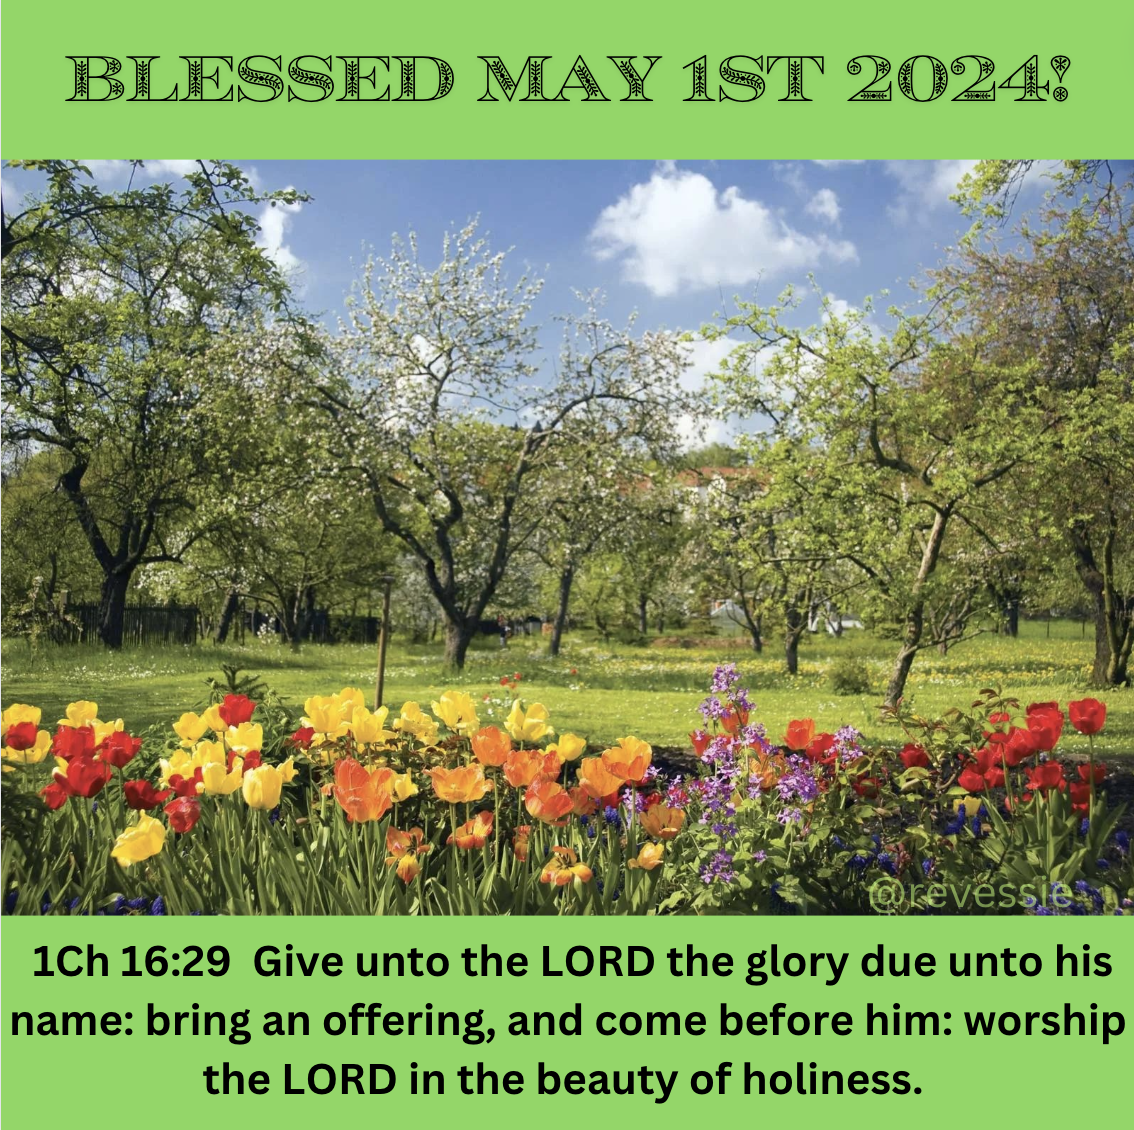 Blessed May 1st 2024!